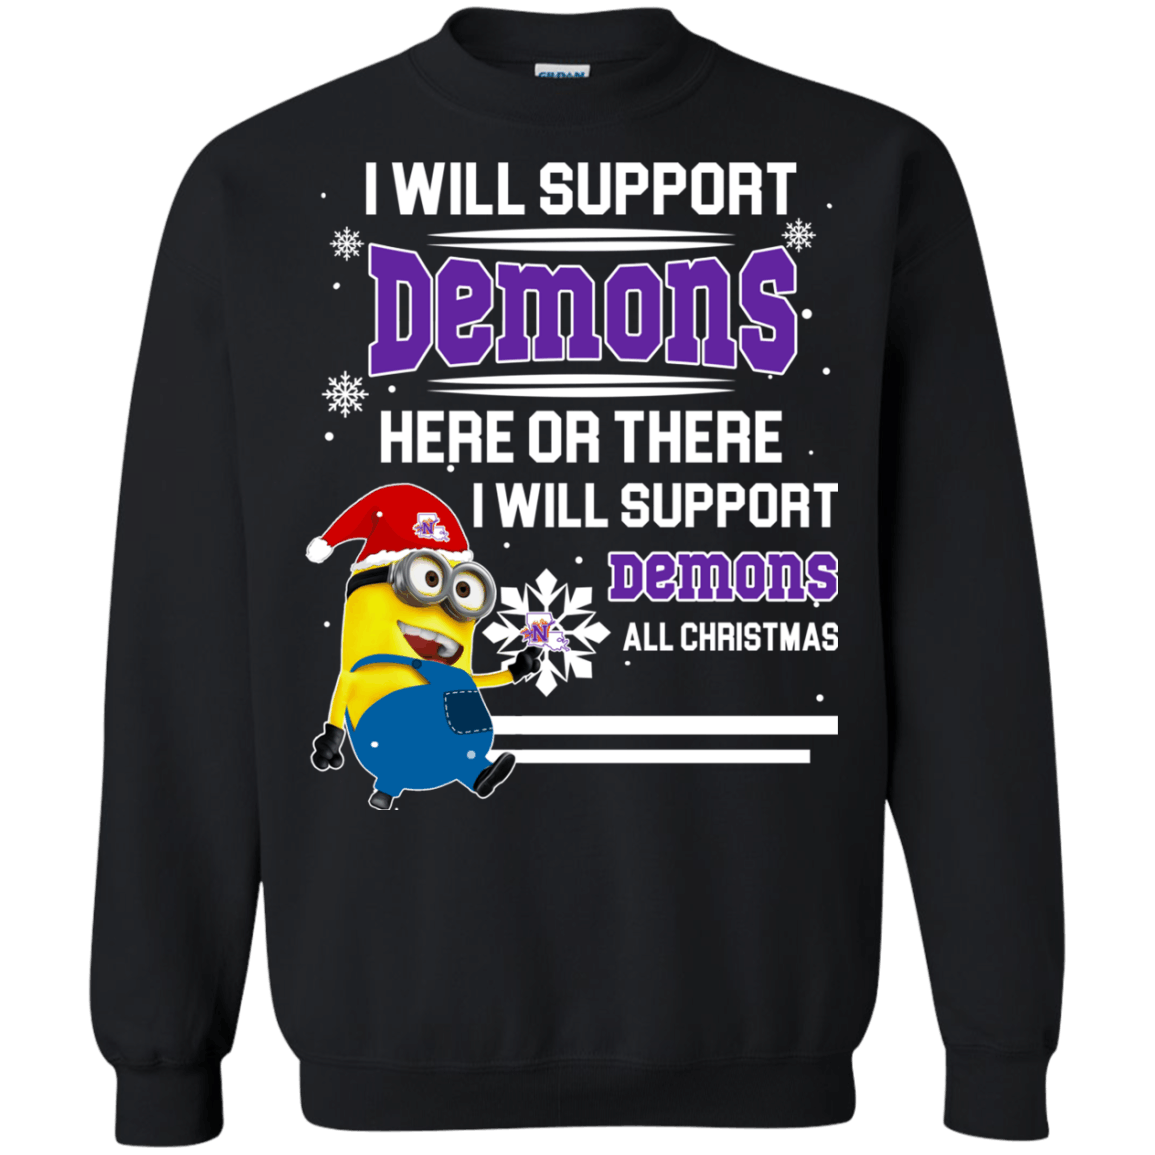 Amazing tee Northwestern State Demons Minion Ugly Christmas Sweaters Support Here Or There All Christmas Sweatshirts